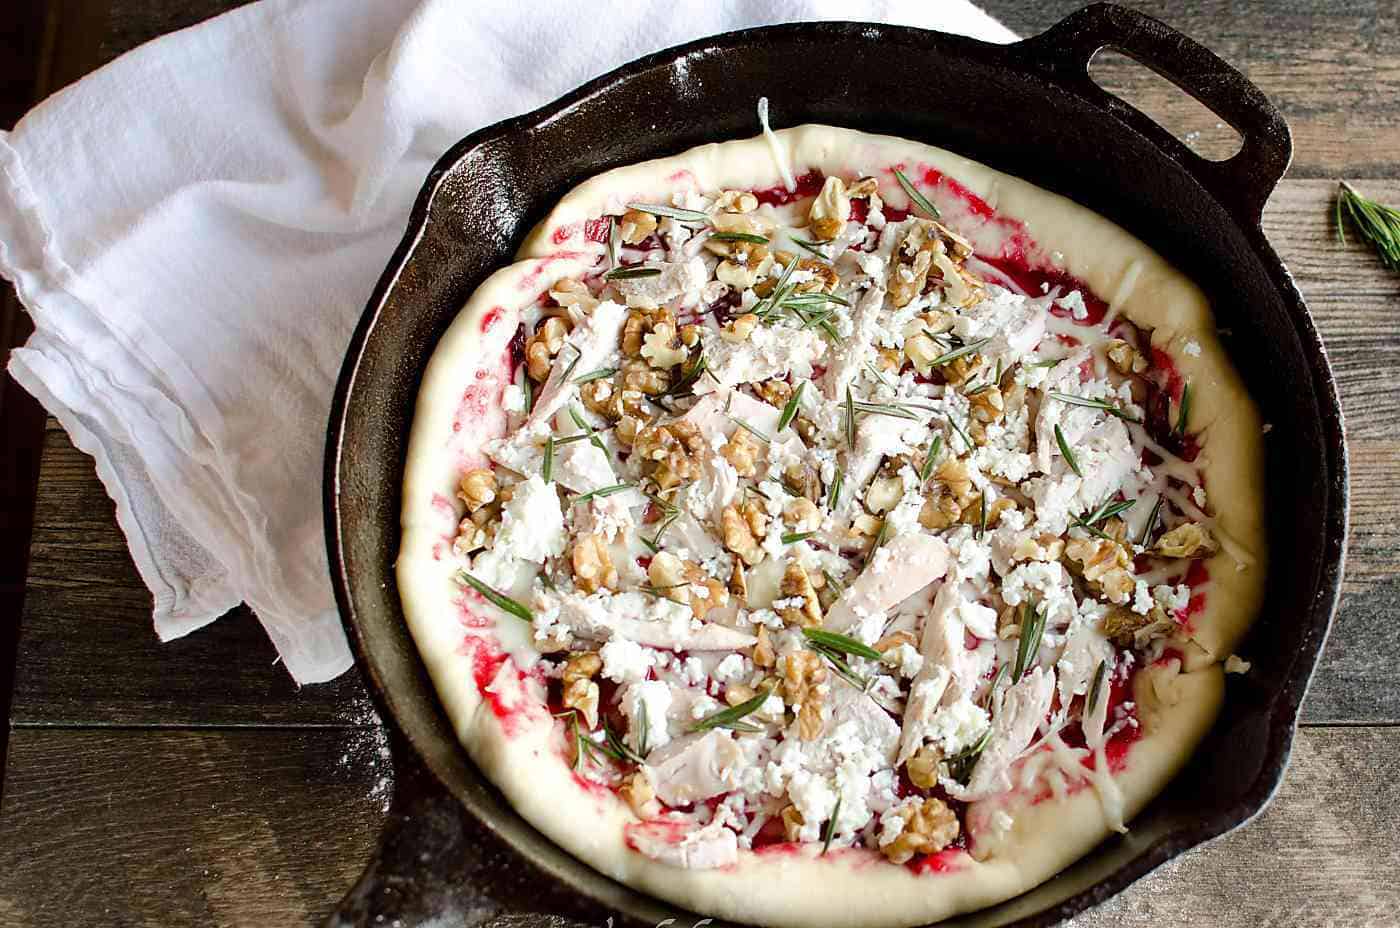 Turkey Cranberry Pizza in a cast iron pan.